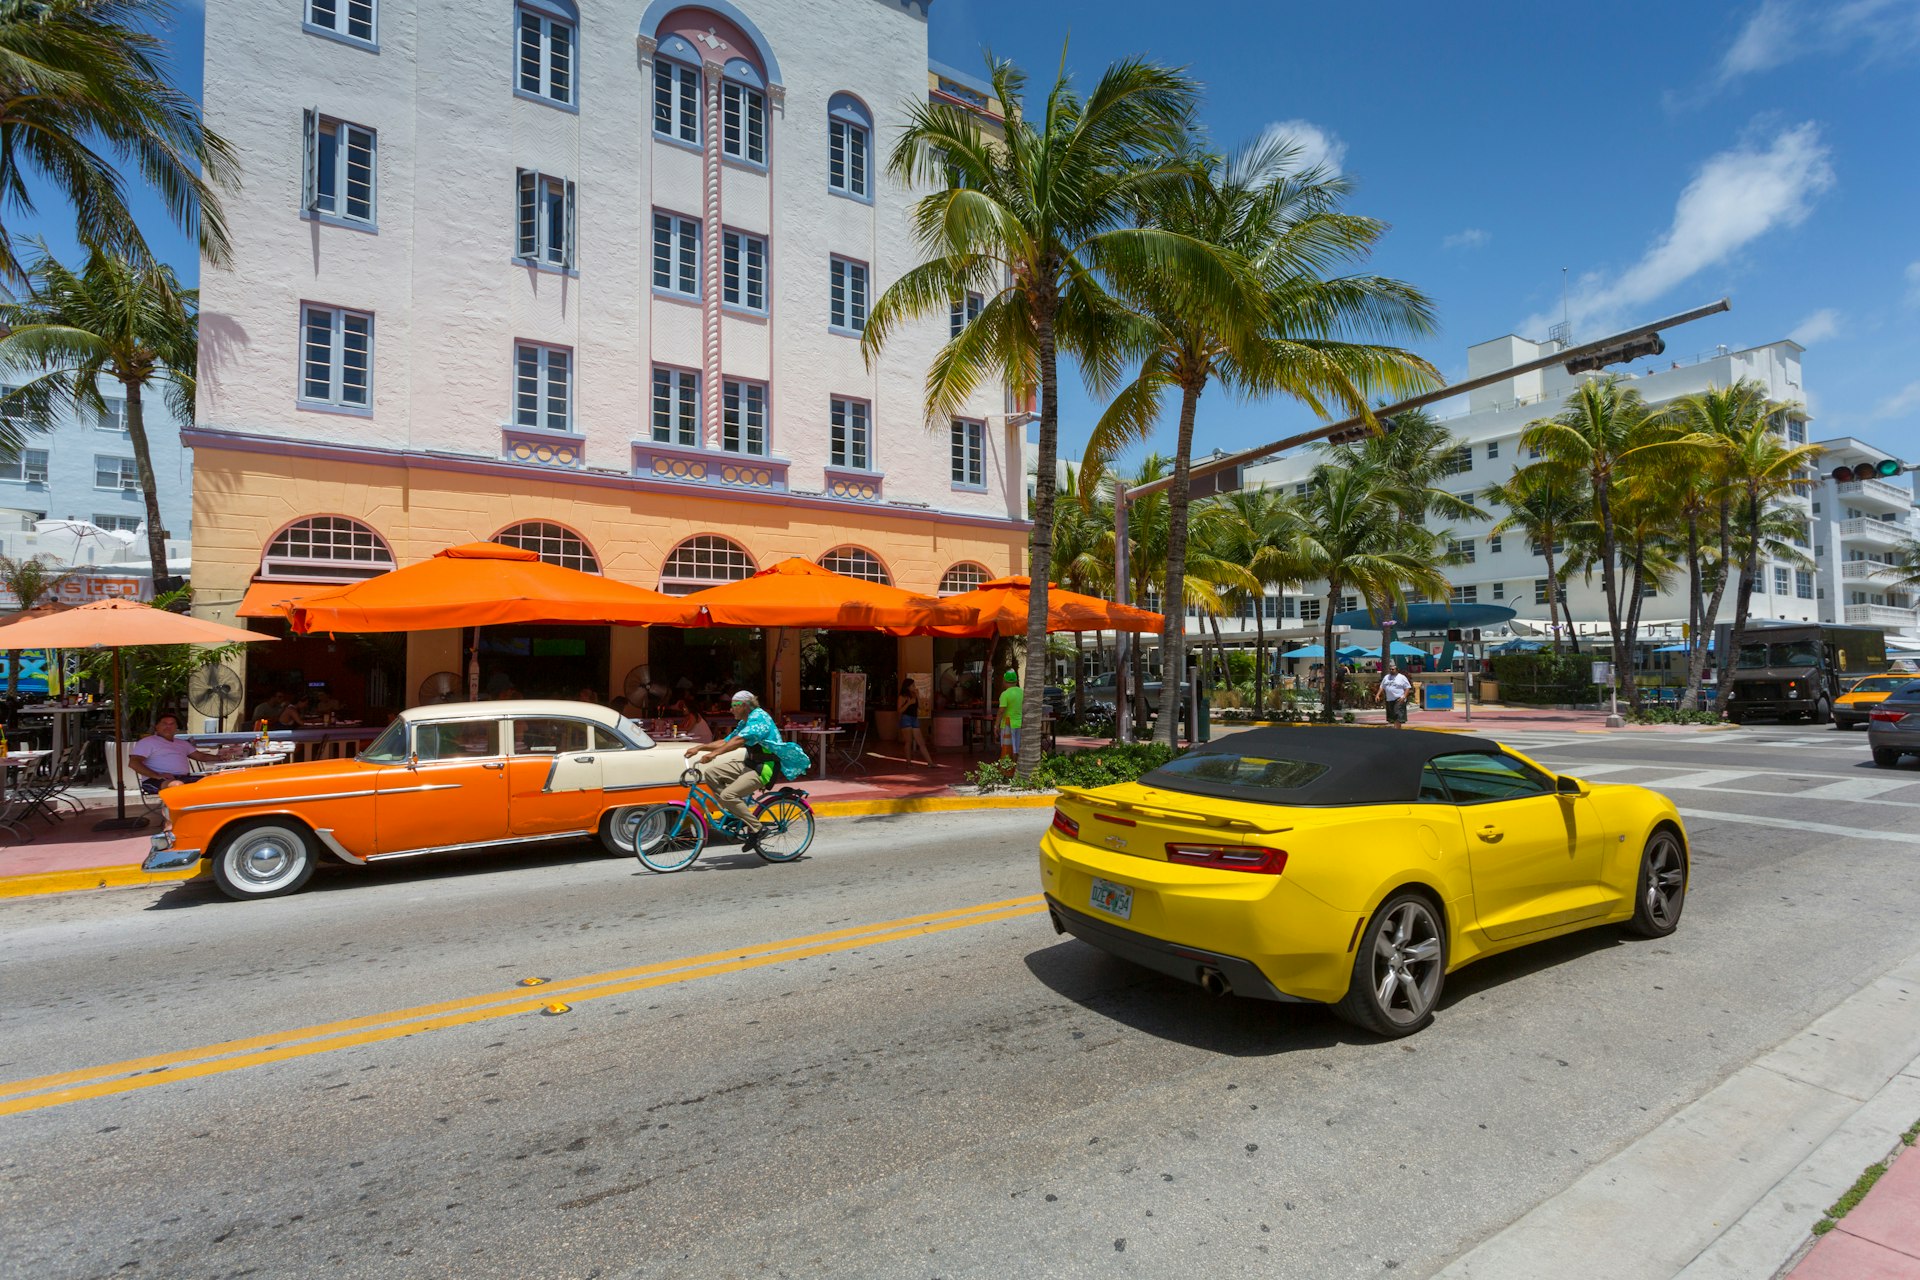 Vintage car & yellow cab on Ocean Drive in South Beach.